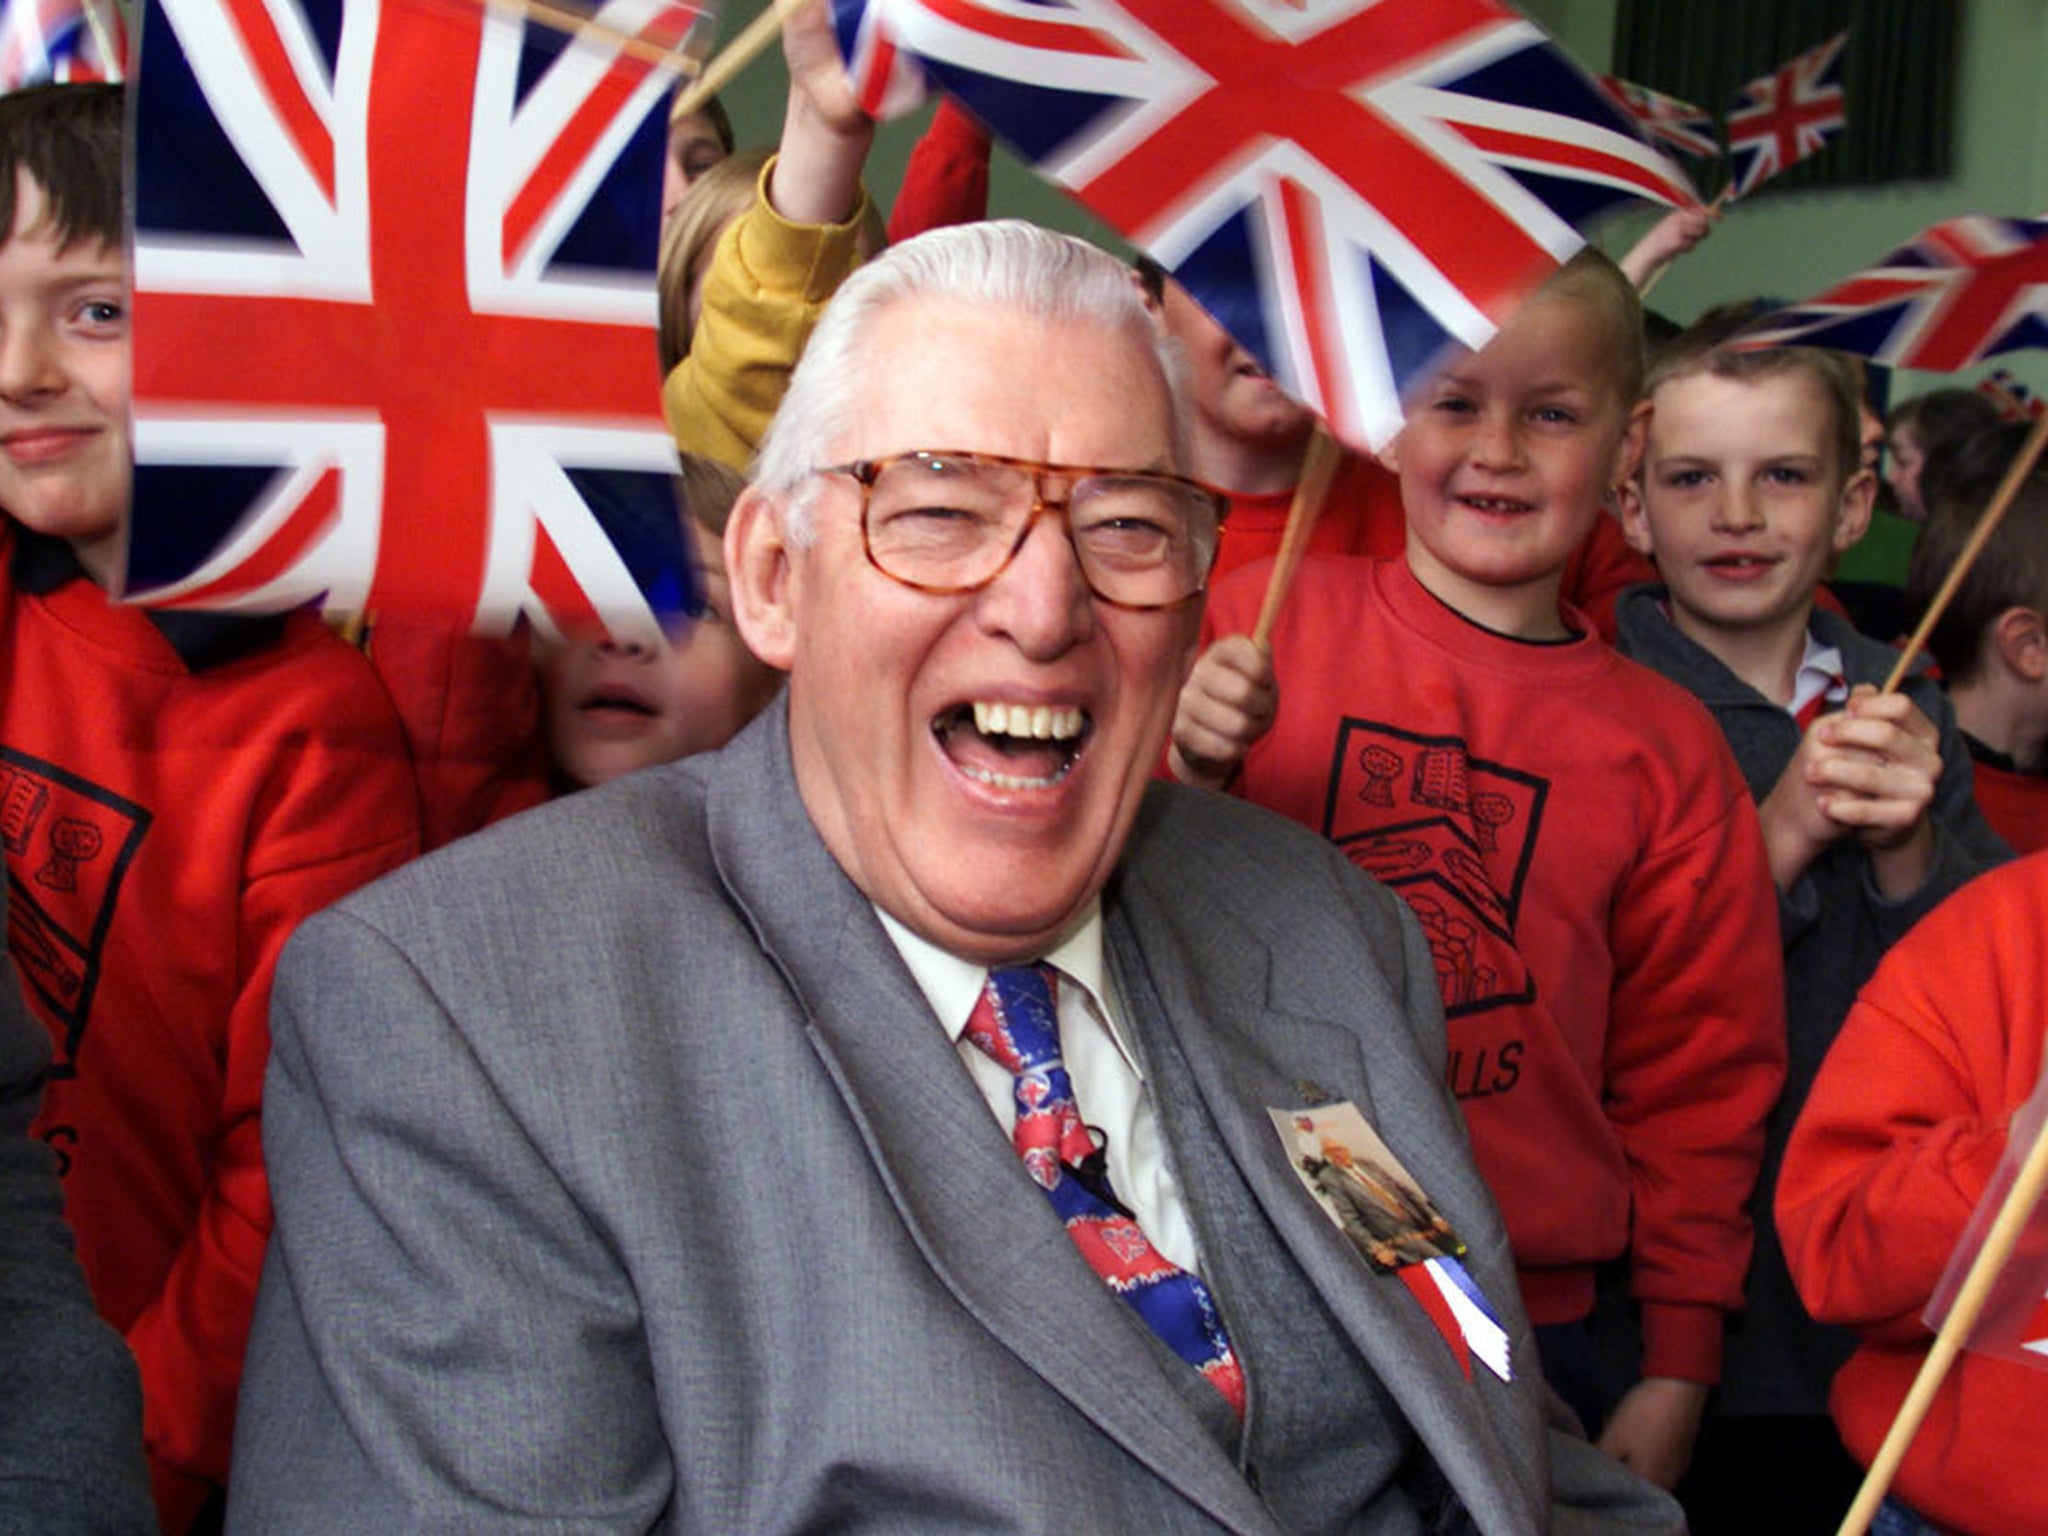 Fiery Protestant leader Ian Paisley in 1999